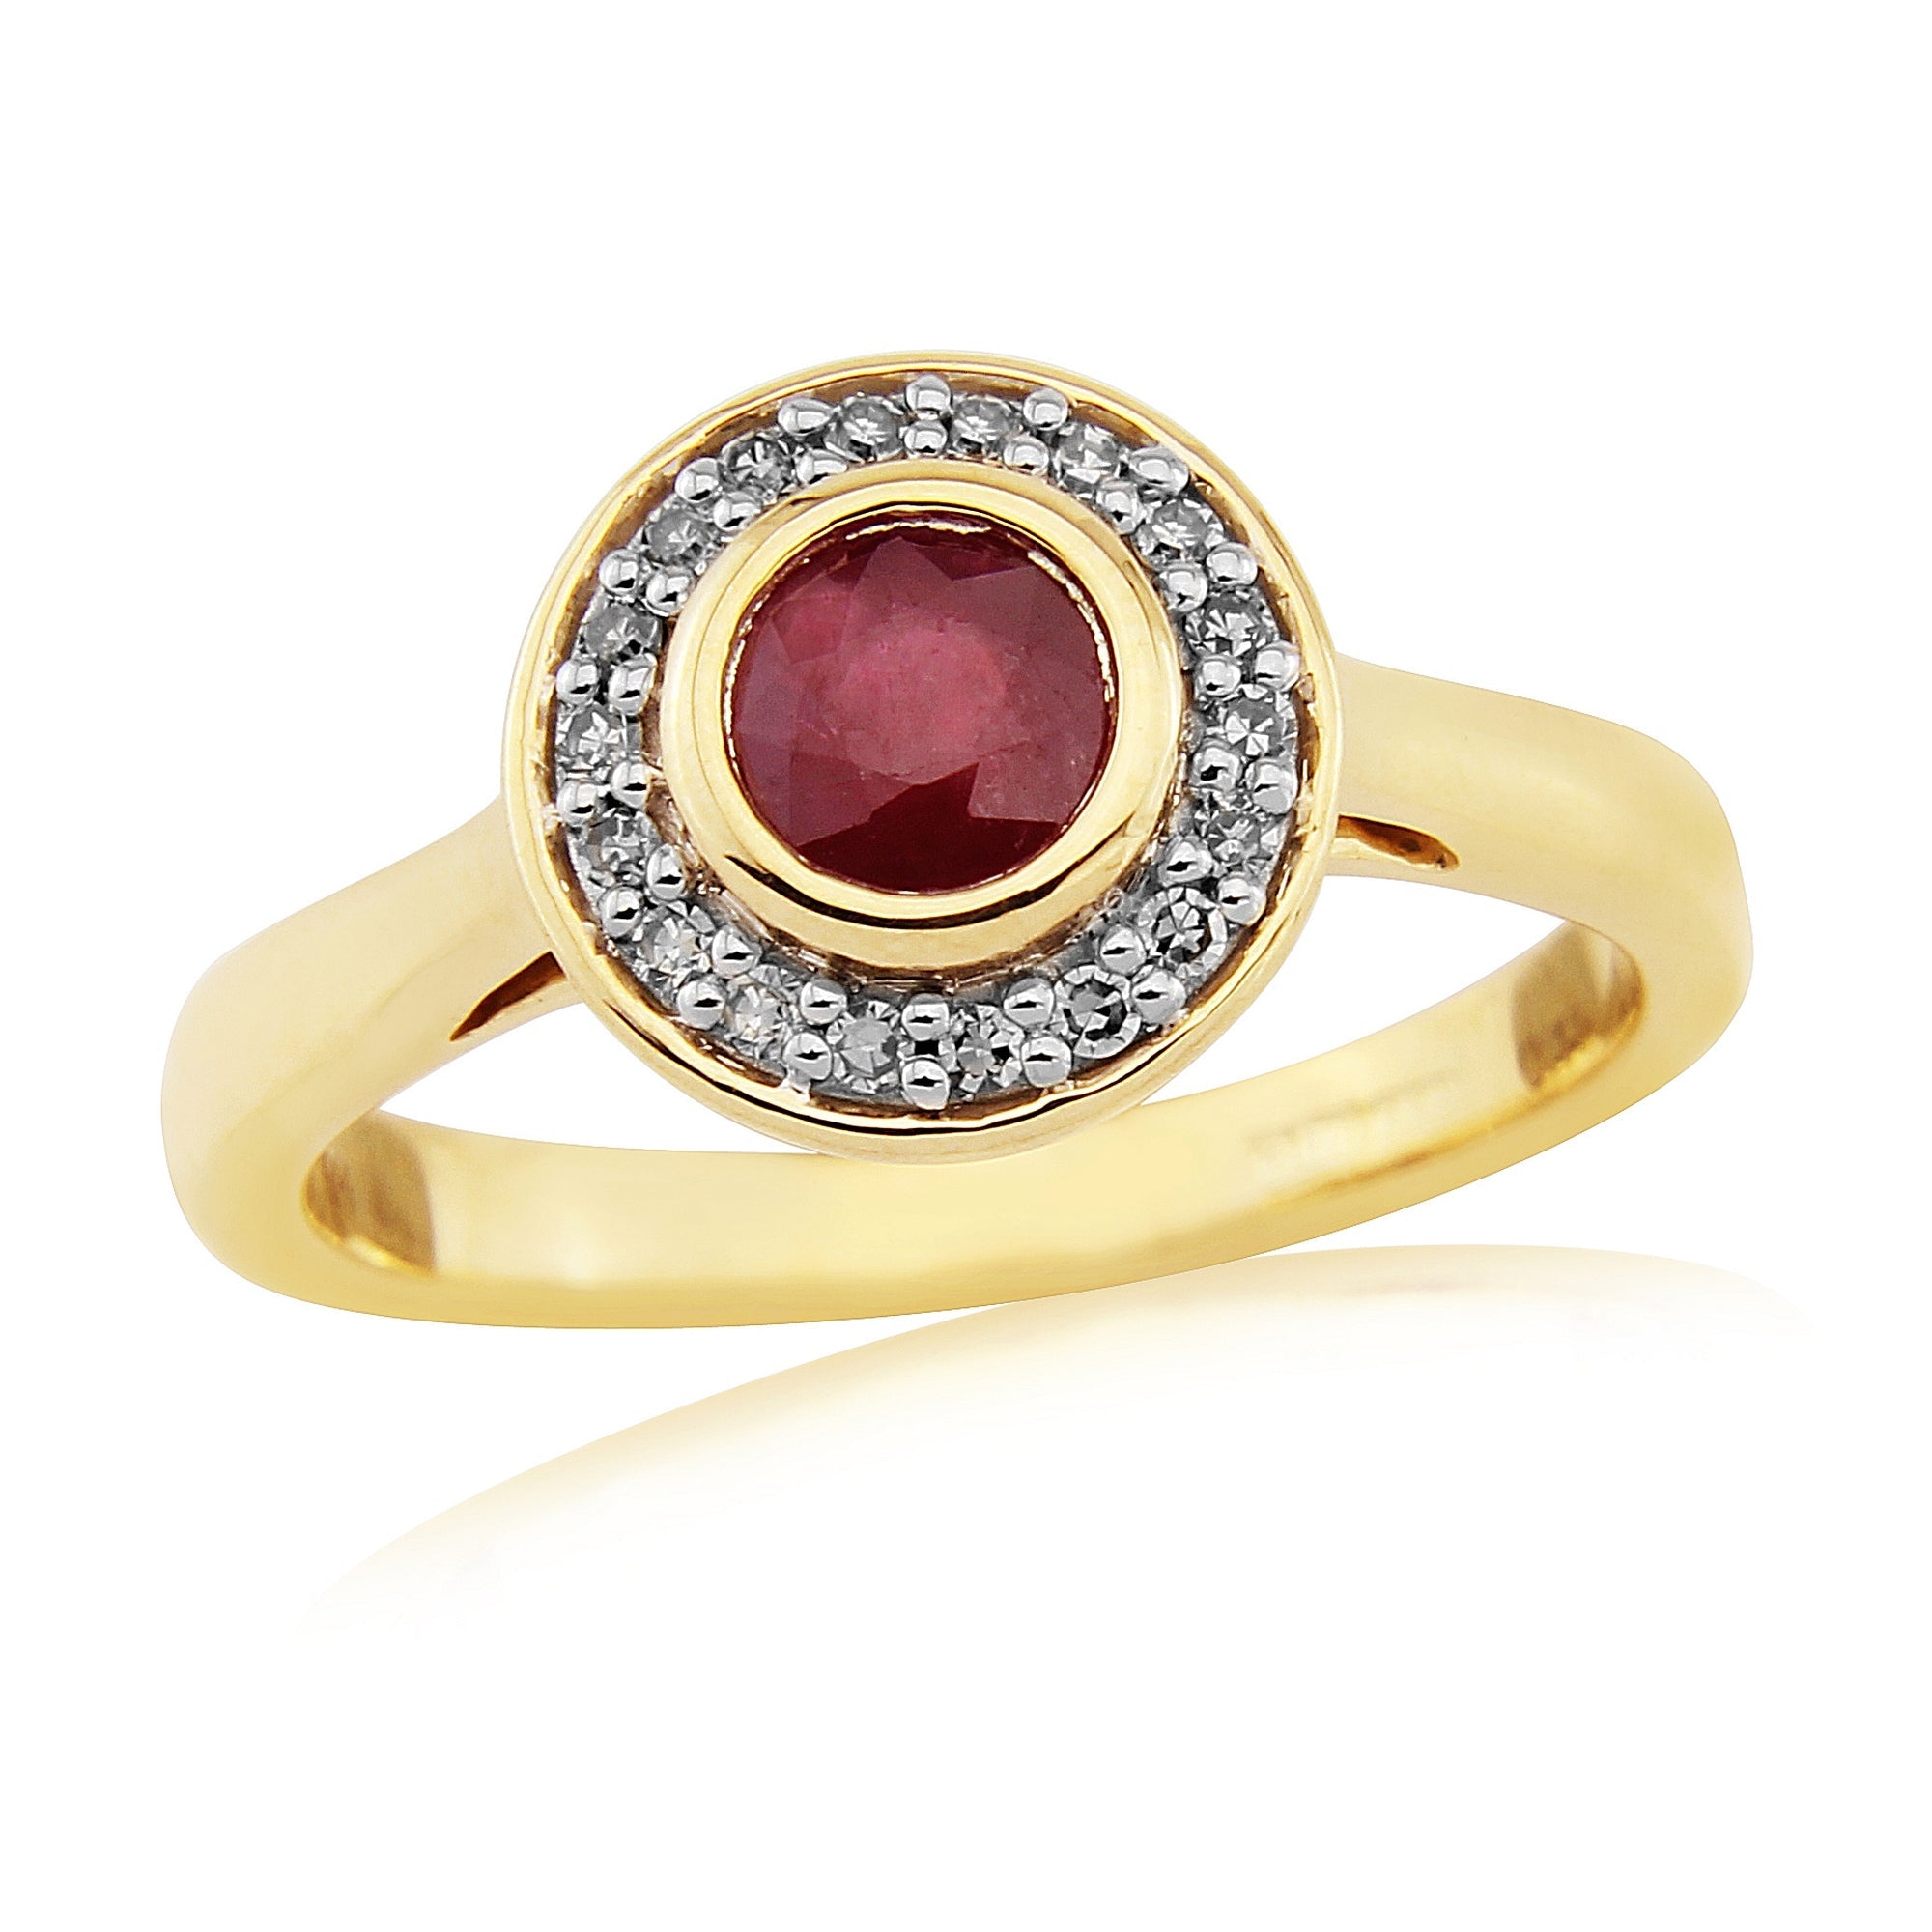 9ct gold 5mm round ruby & diamond cluster ring 0.11ct